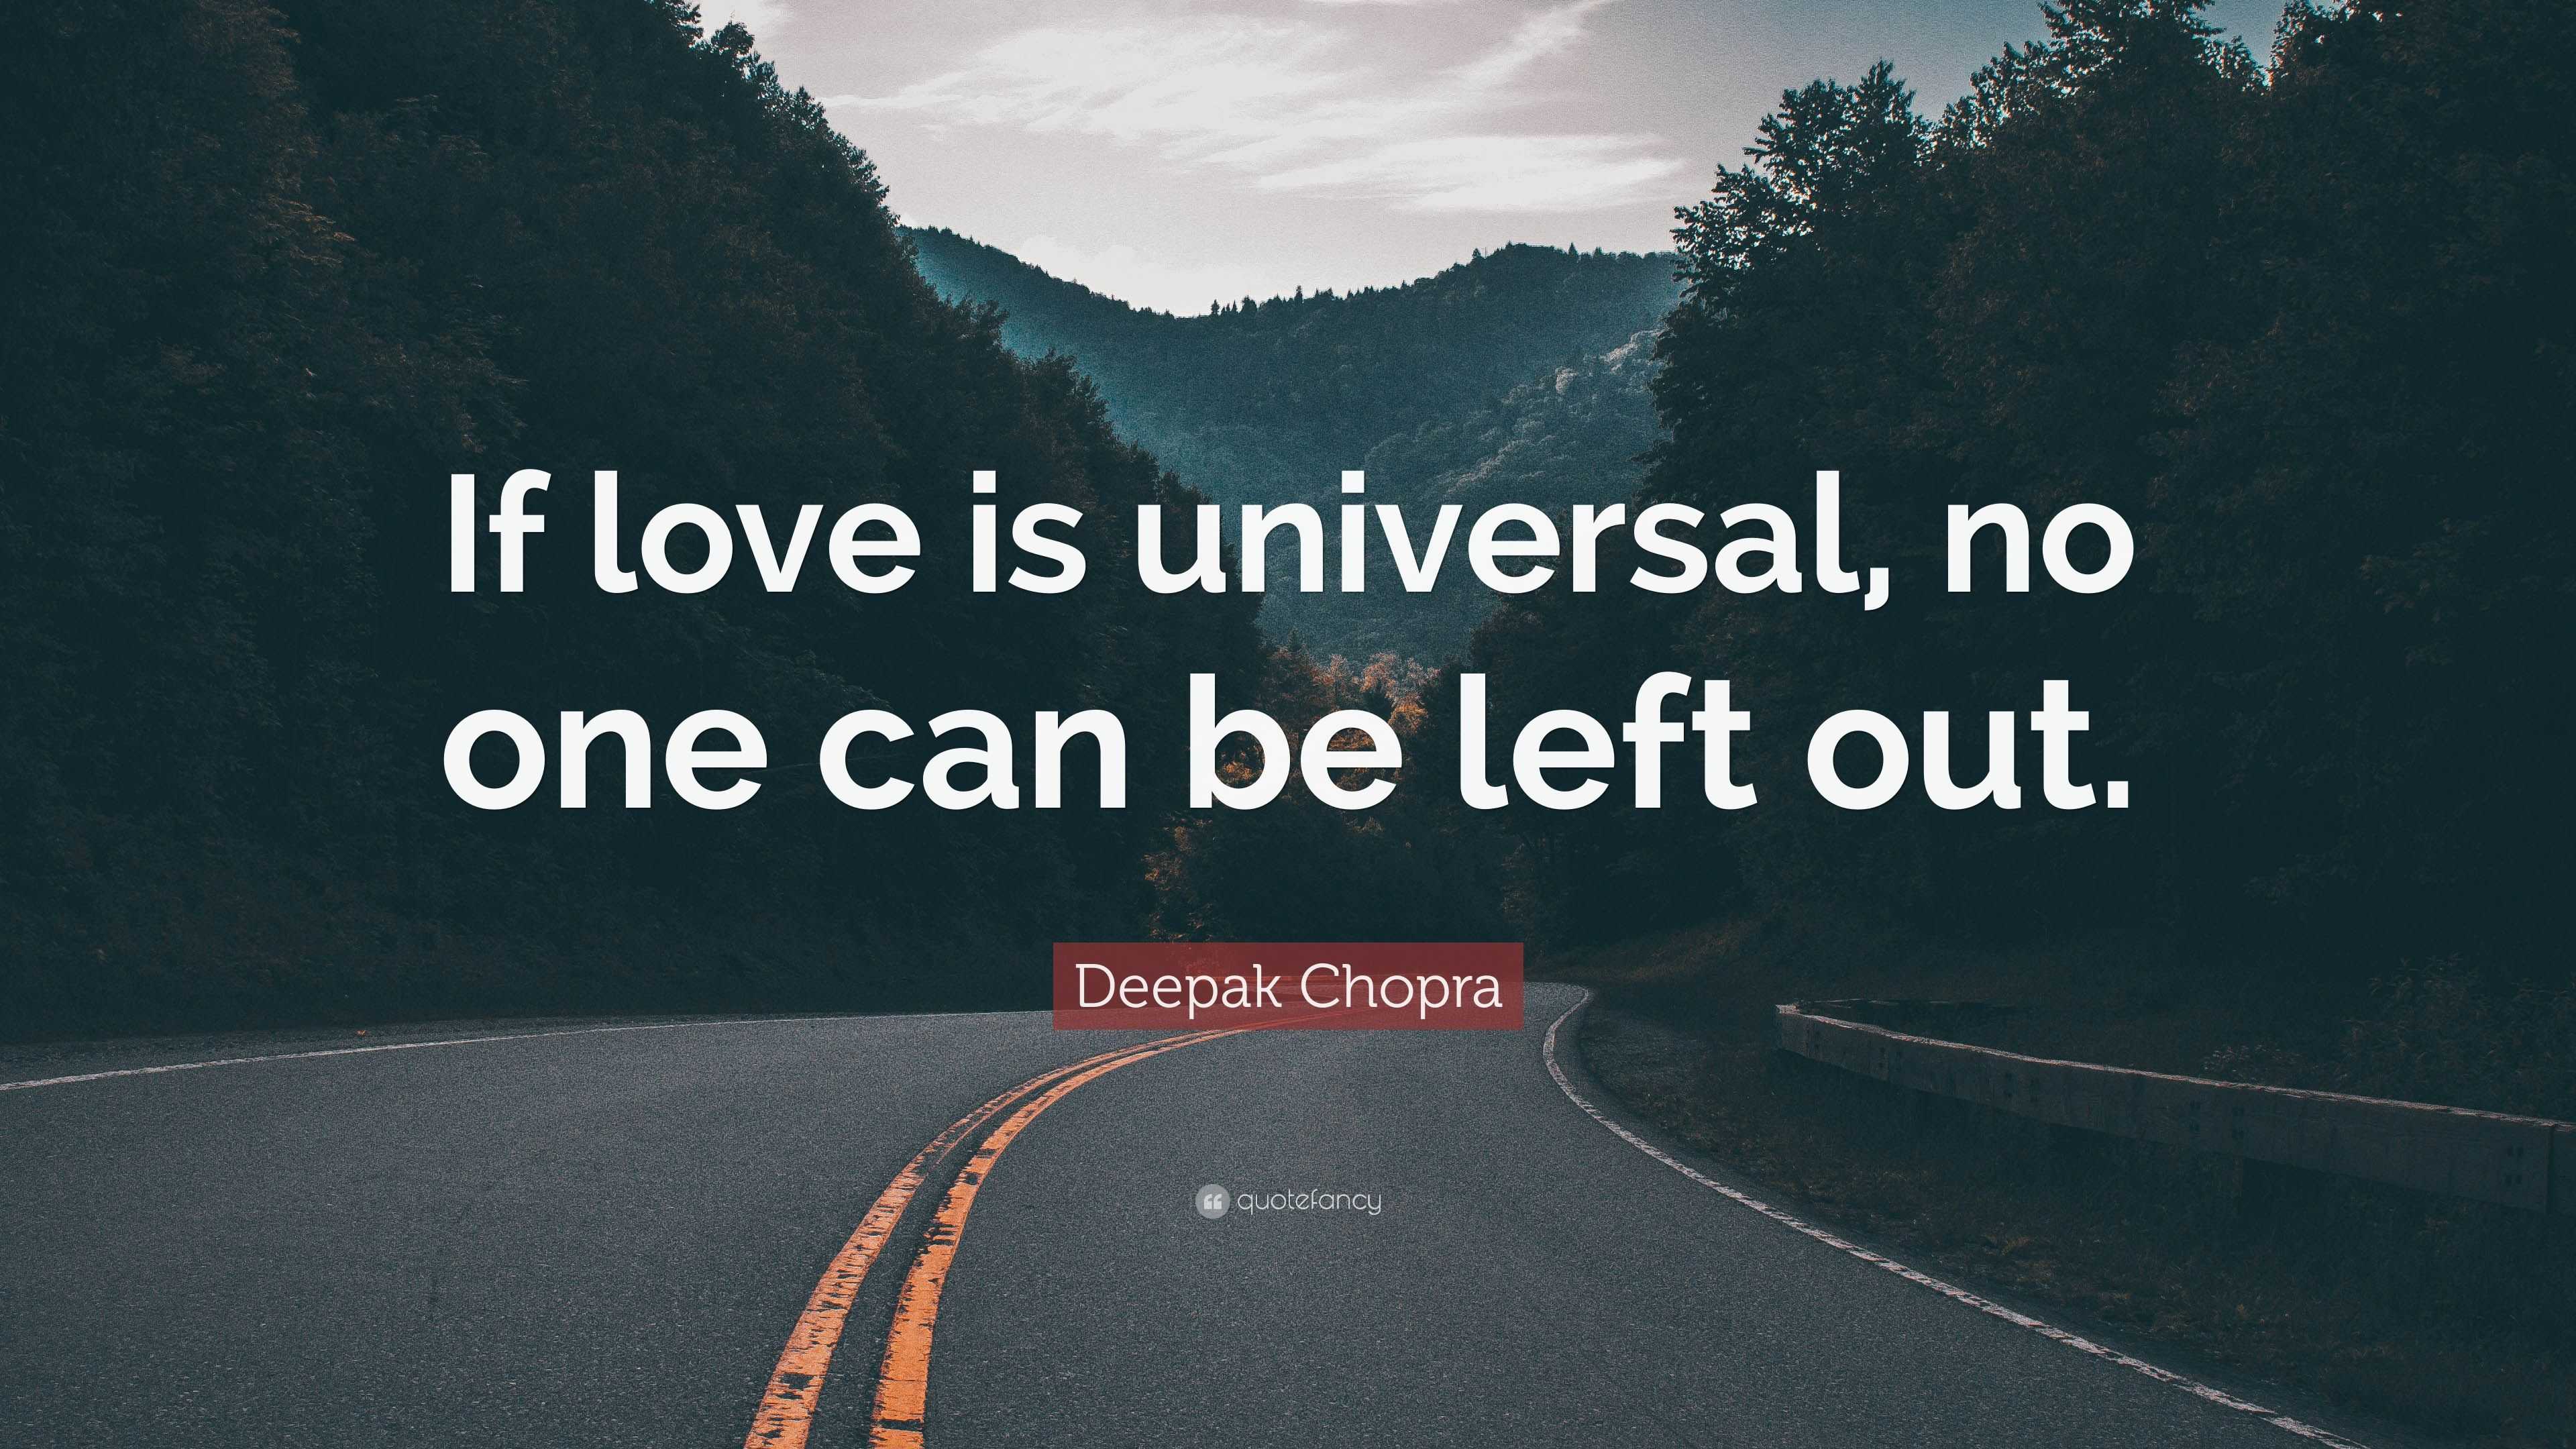 Deepak Chopra Quote: “If love is universal, no one can be left out.”